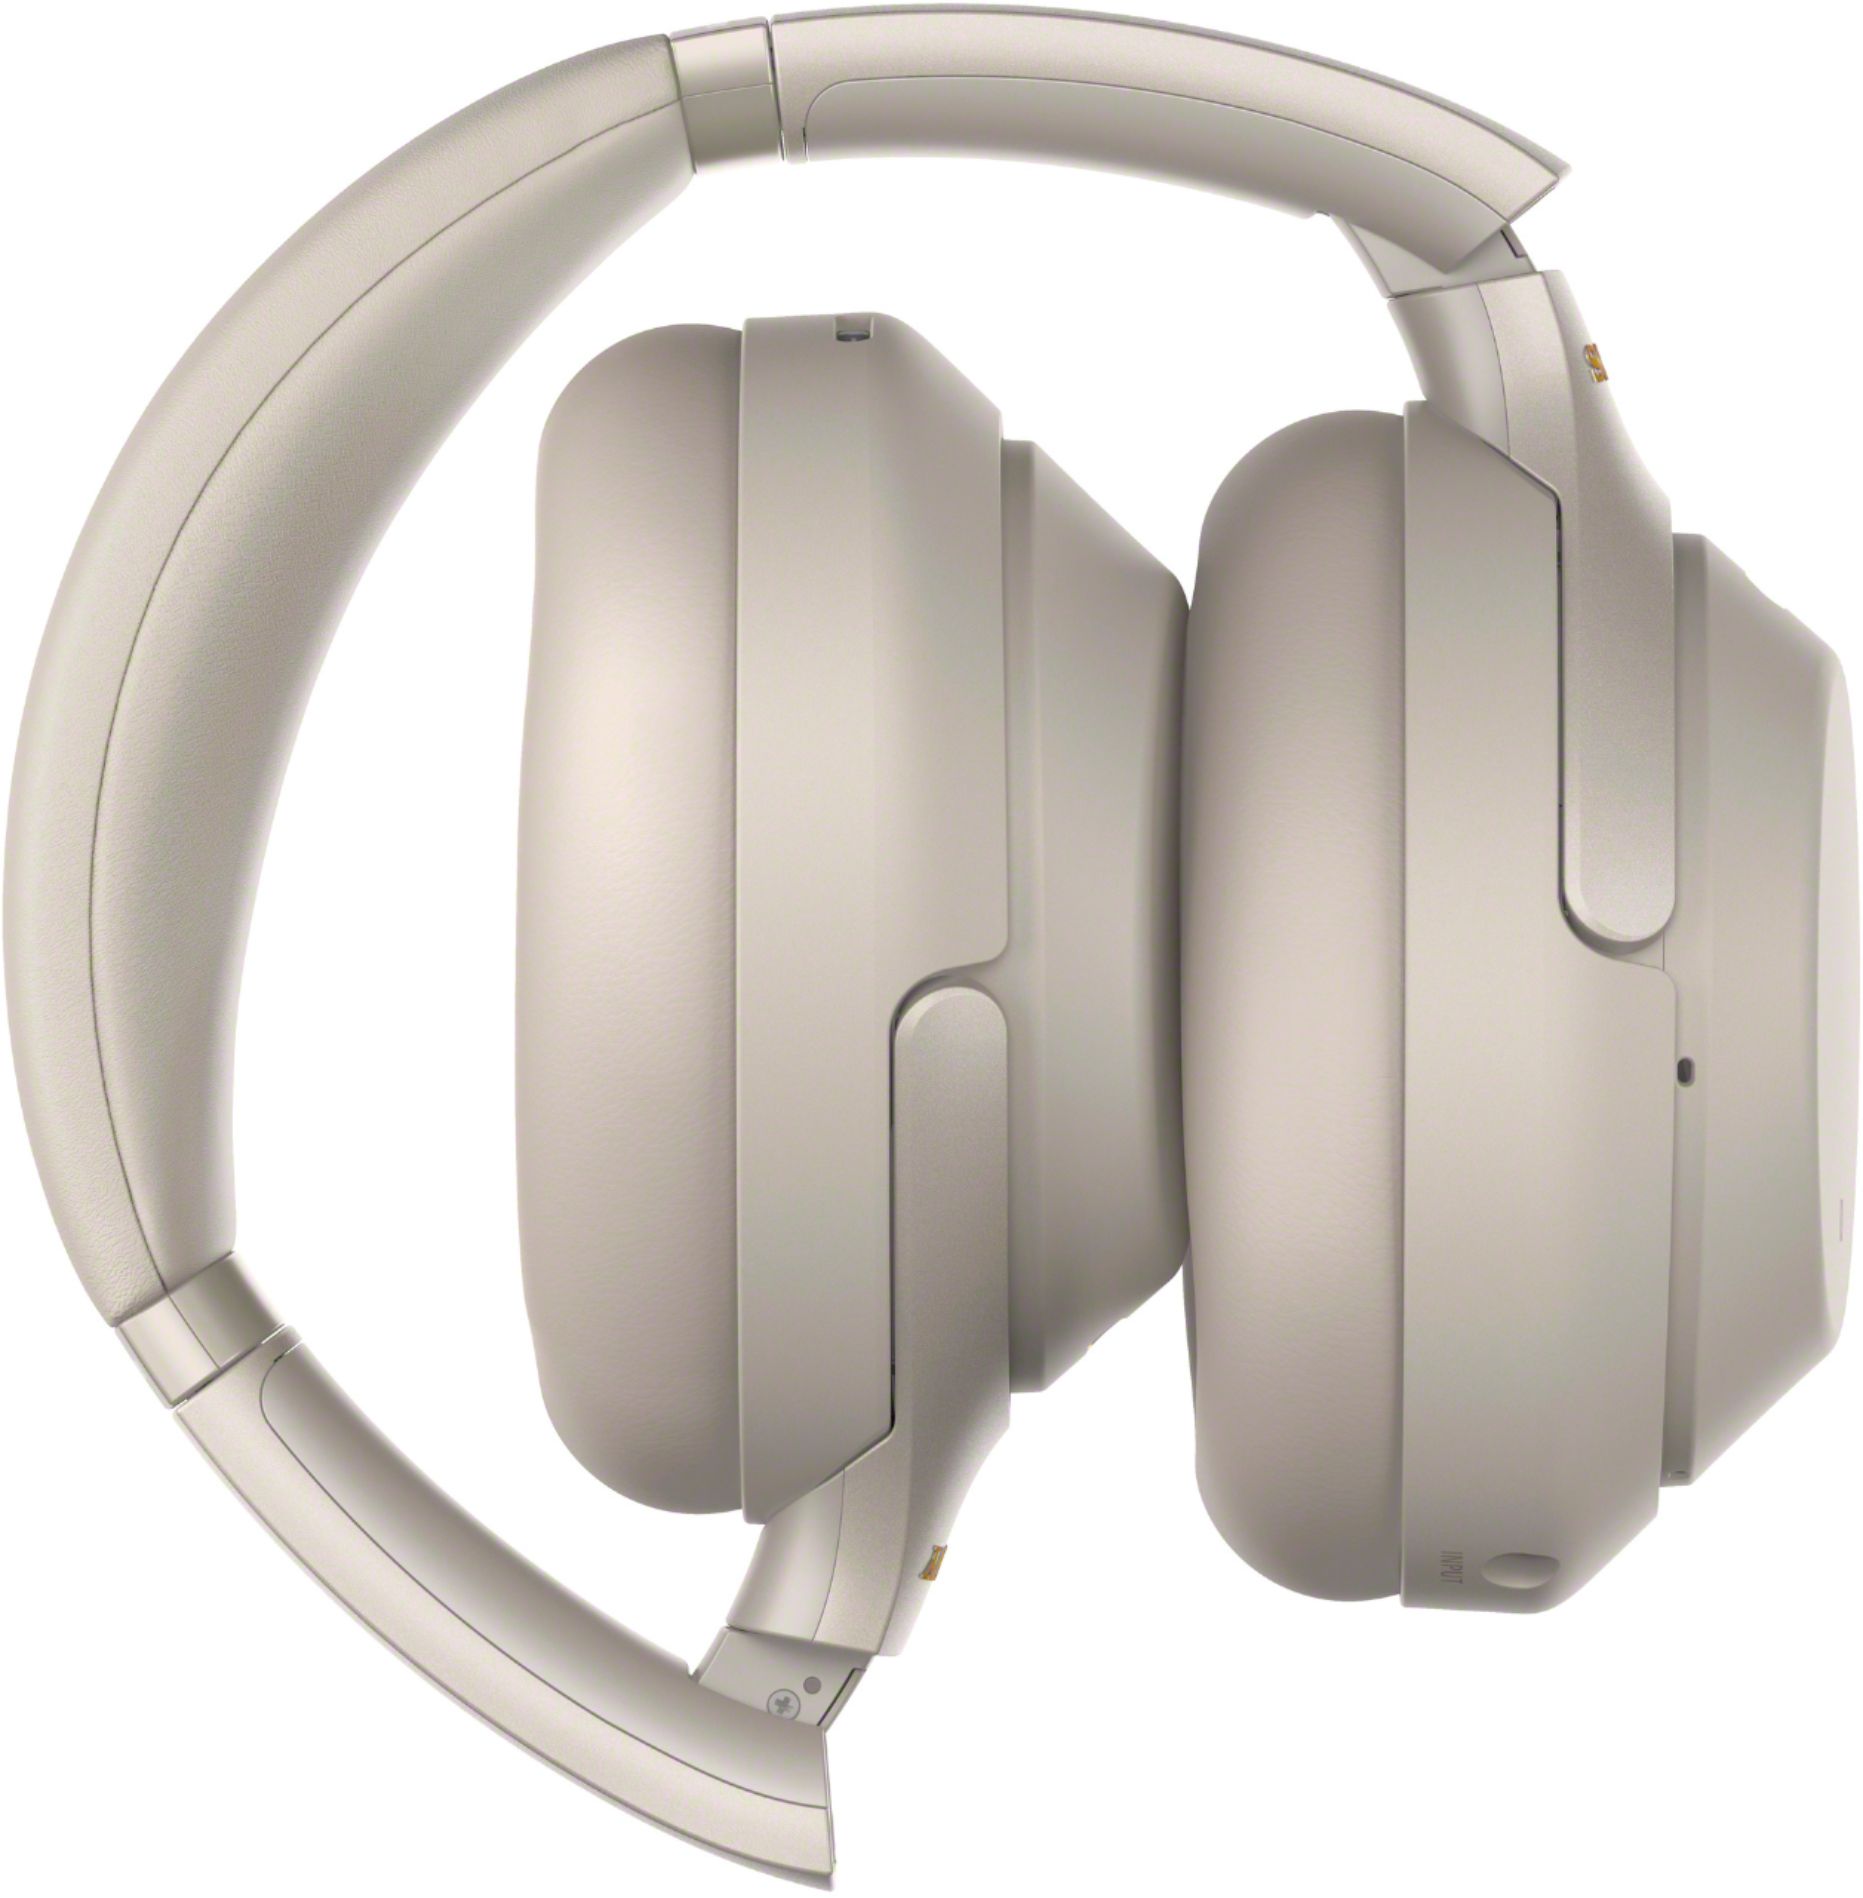 Best Buy: Sony WH-1000XM3 Wireless Noise Cancelling Over-the